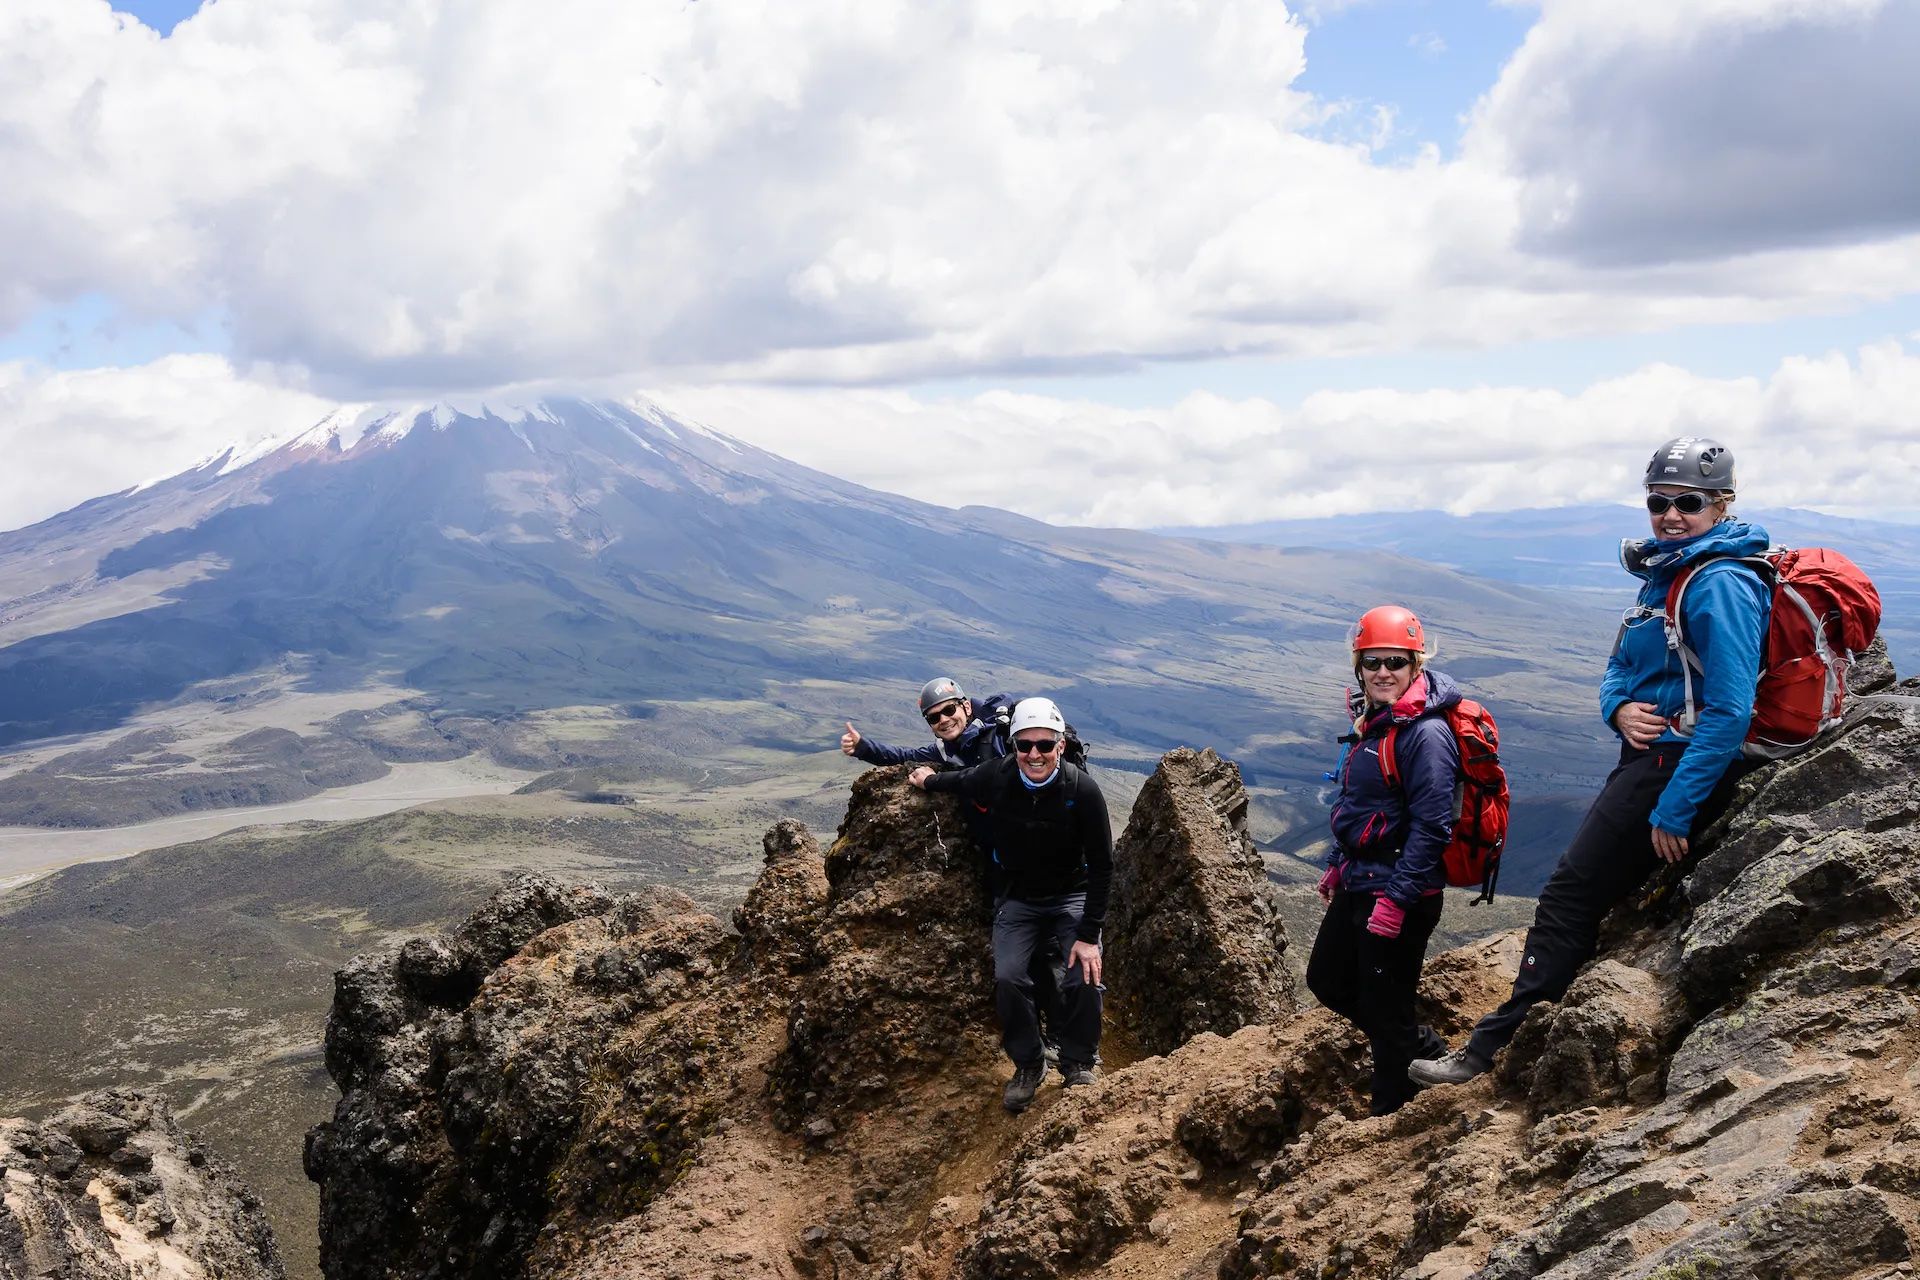 Hikers pose on the summit of  Rumiñahui, Ecaudor. Cotopaxi can be seen in the background.